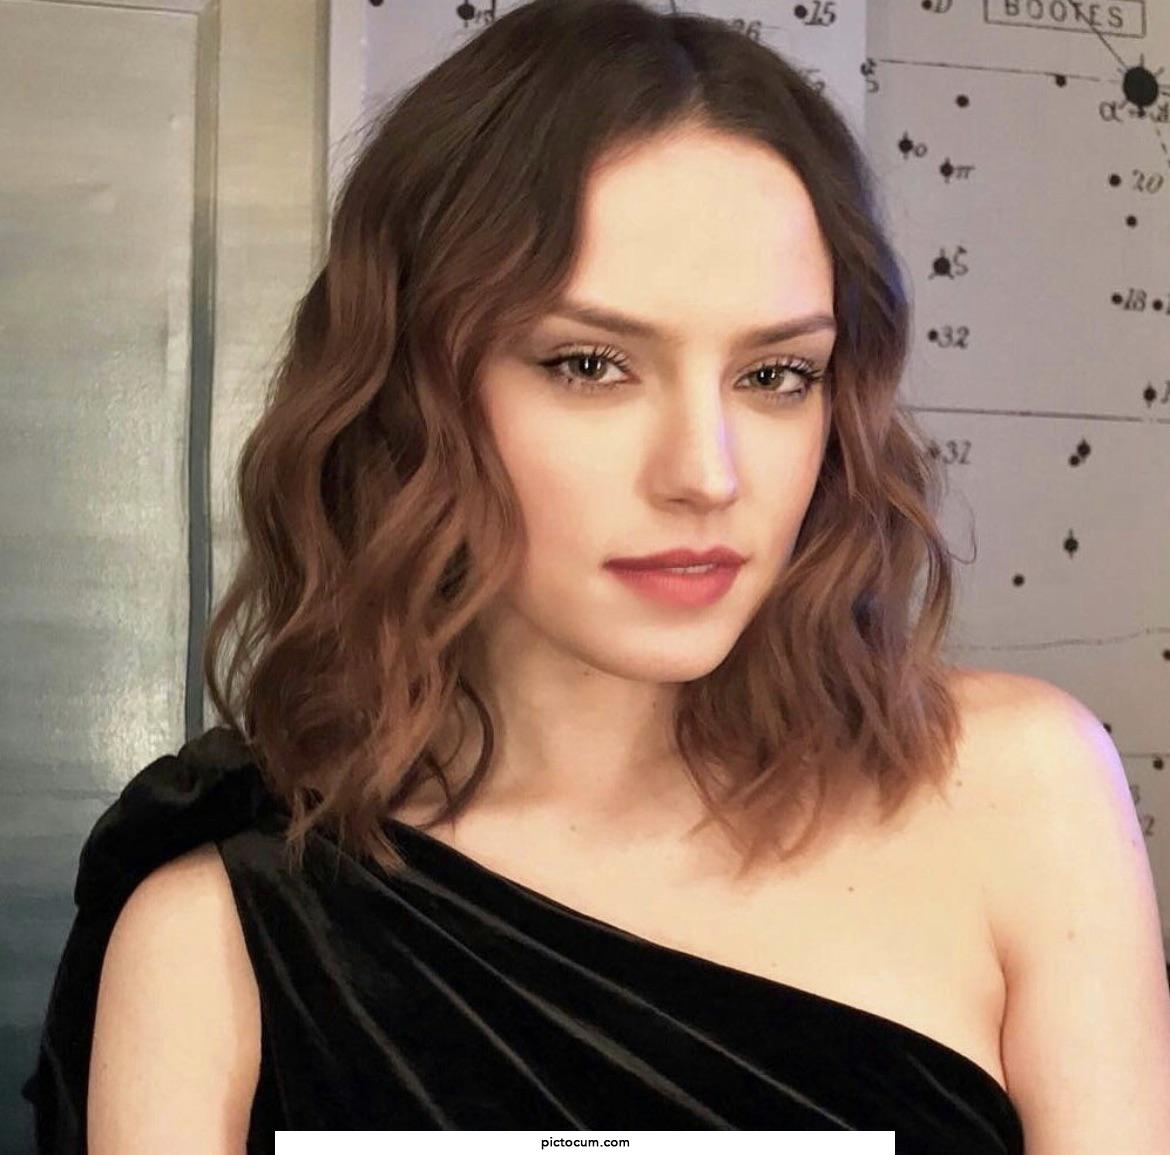 Would love to film a doggy sex scene with Daisy Ridley that will break the internet